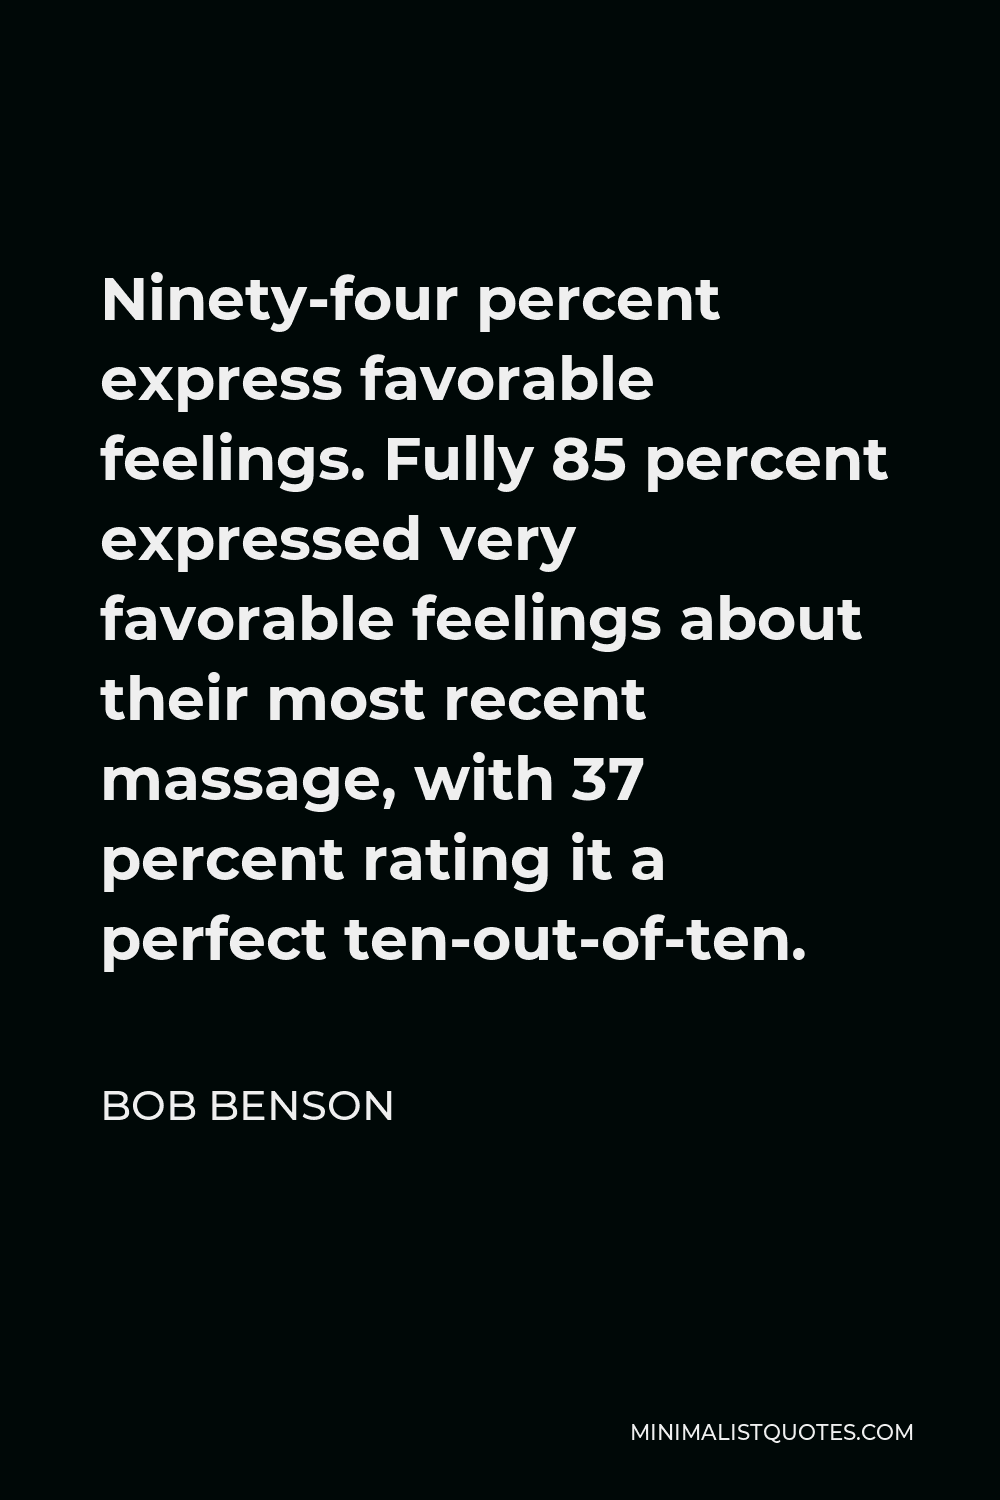 Bob Benson Quote - Ninety-four percent express favorable feelings. Fully 85 percent expressed very favorable feelings about their most recent massage, with 37 percent rating it a perfect ten-out-of-ten.